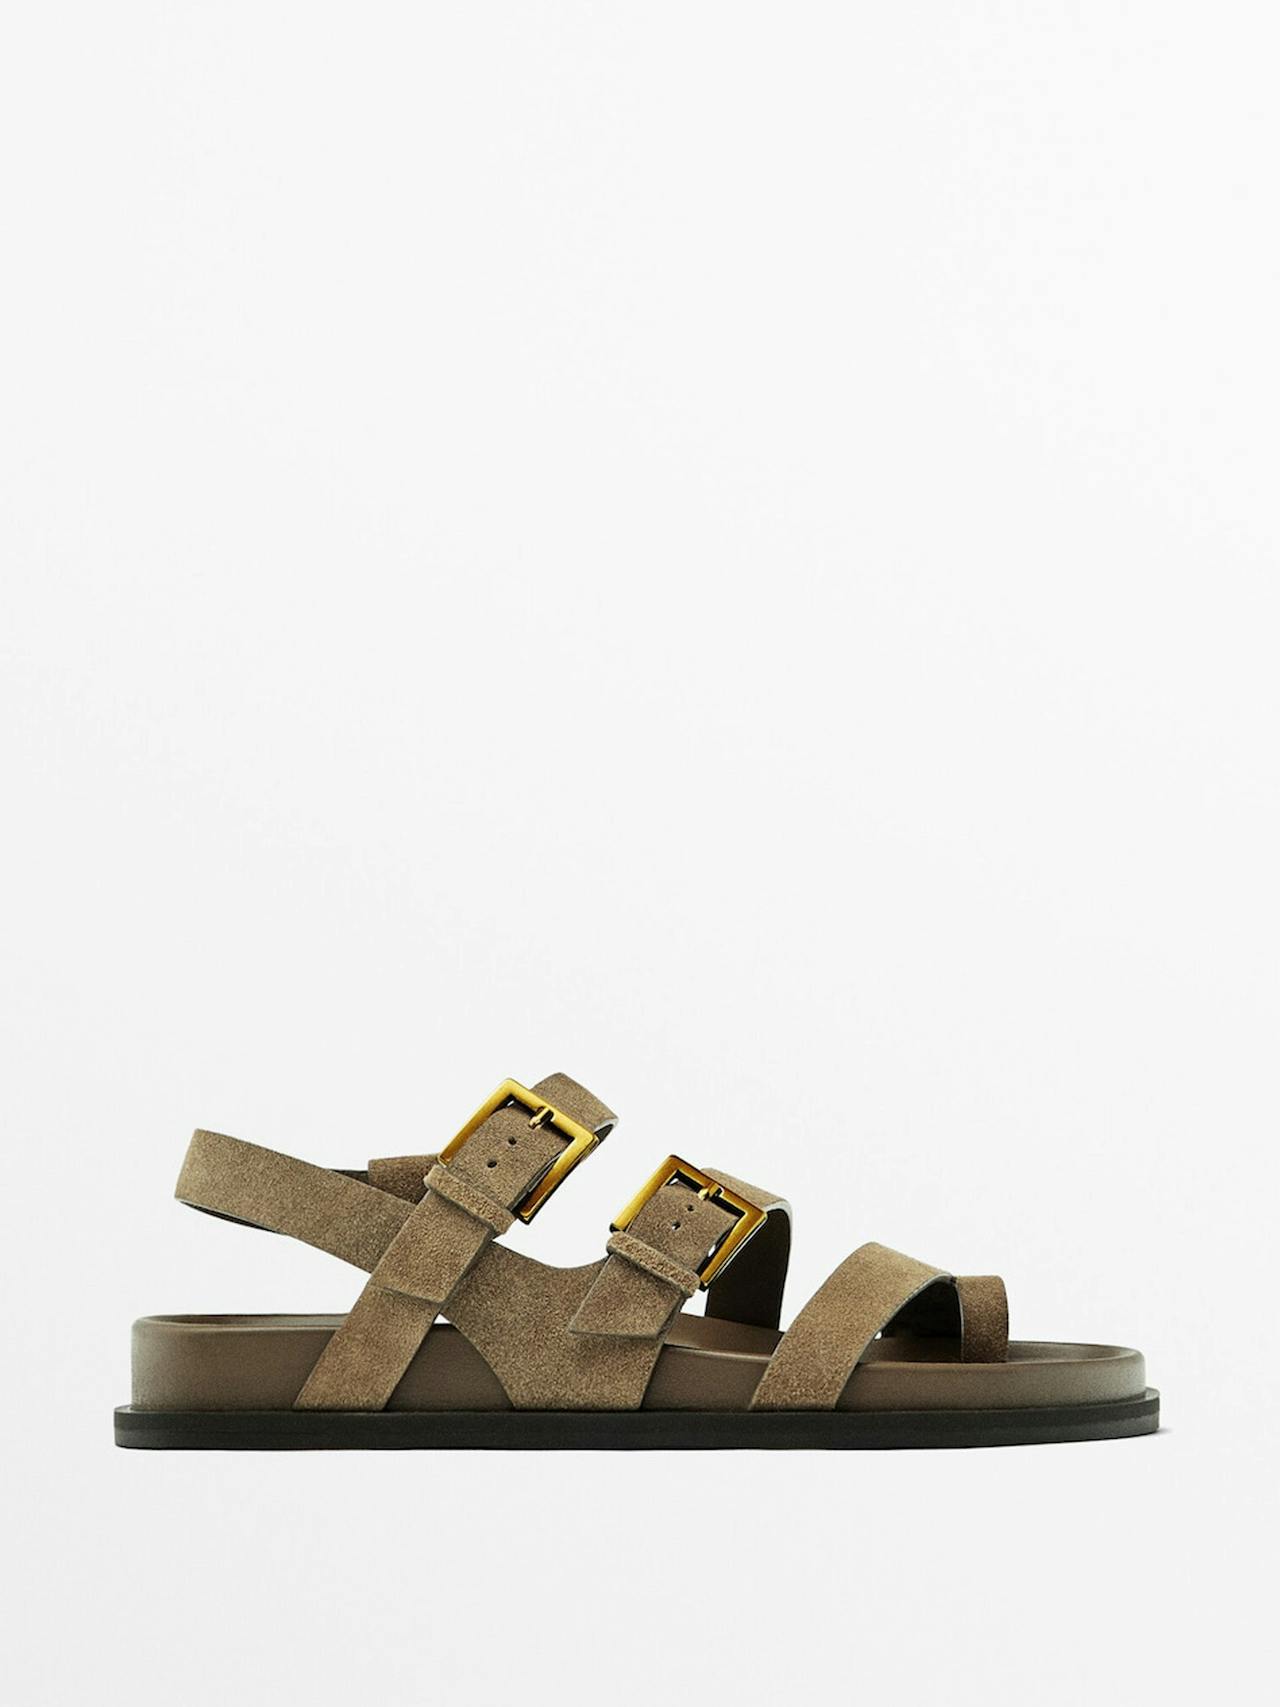 Flat sandals with buckles